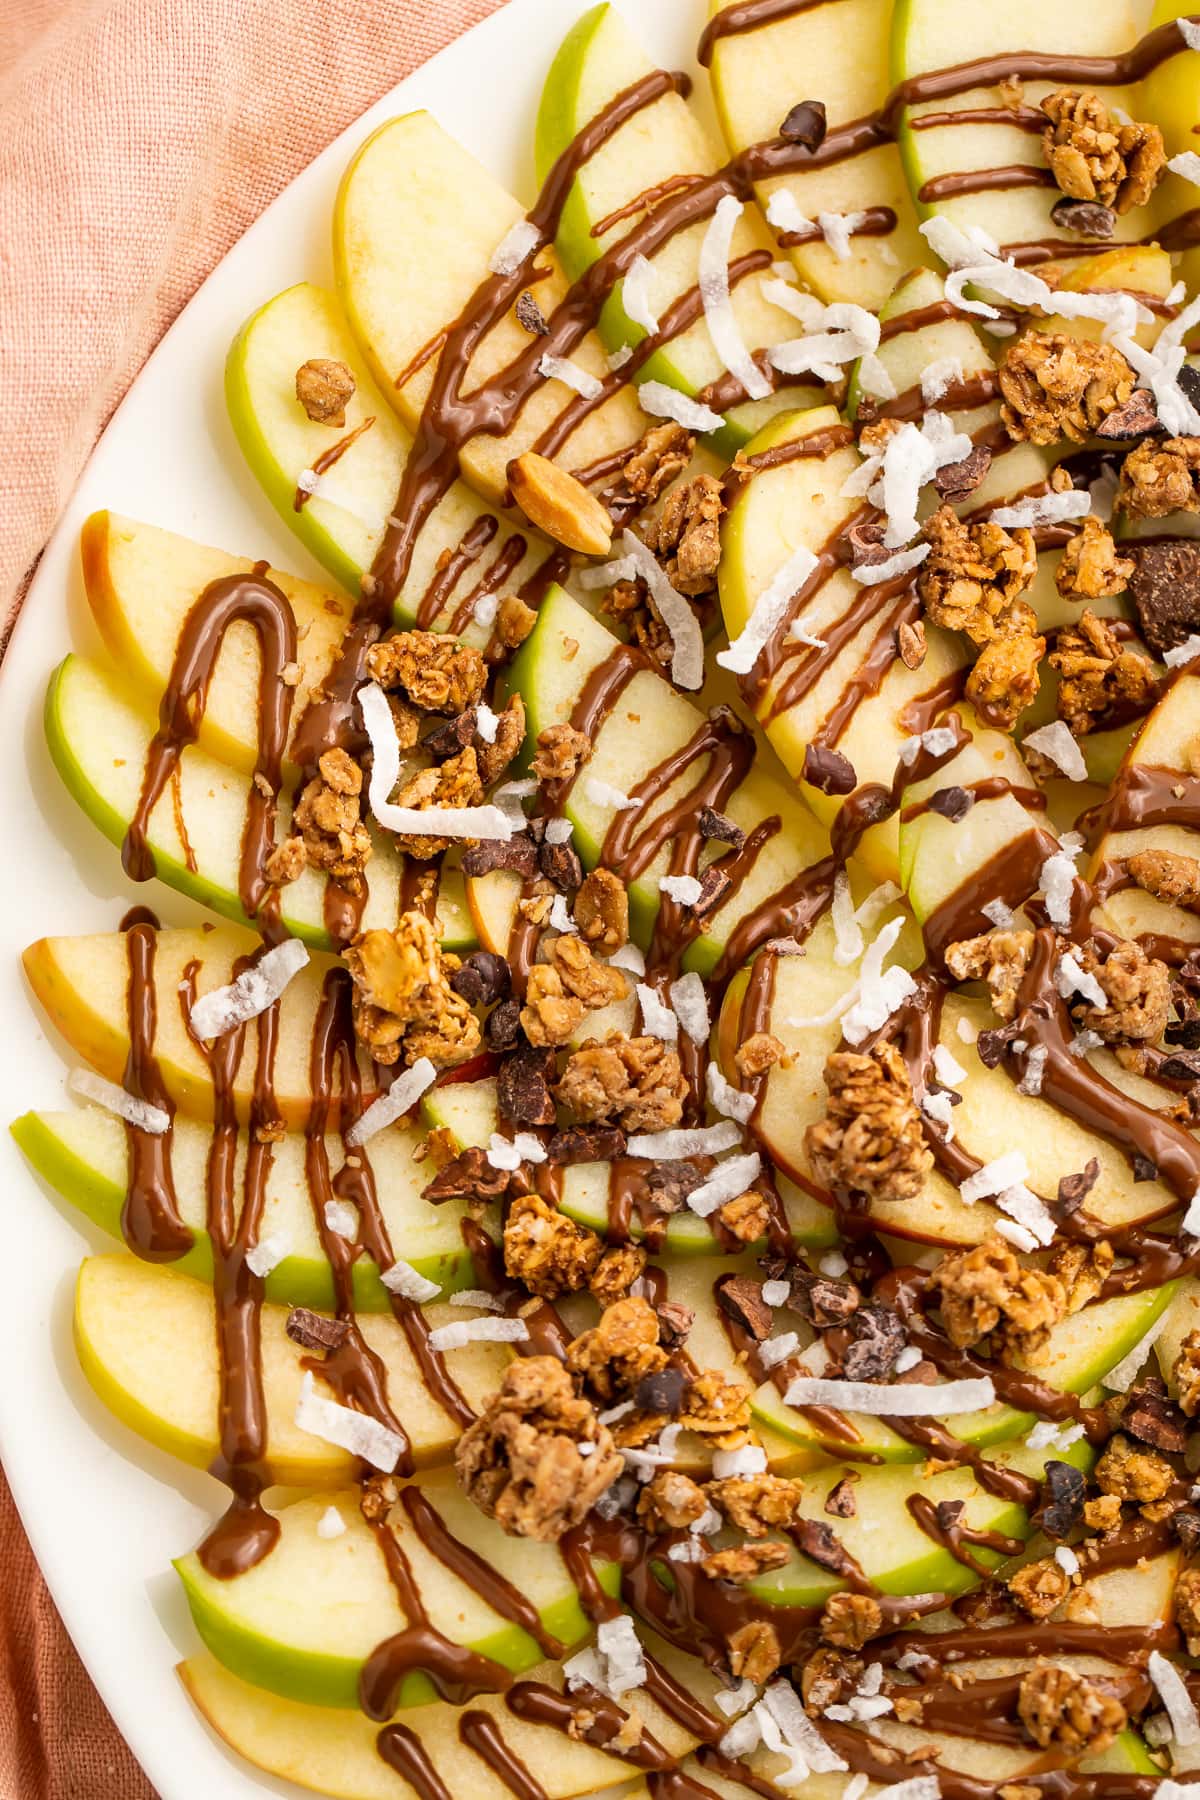 Overhead, top-down look at a plate of green and red apple slices topped with swirls of chocolate syrup and granola.